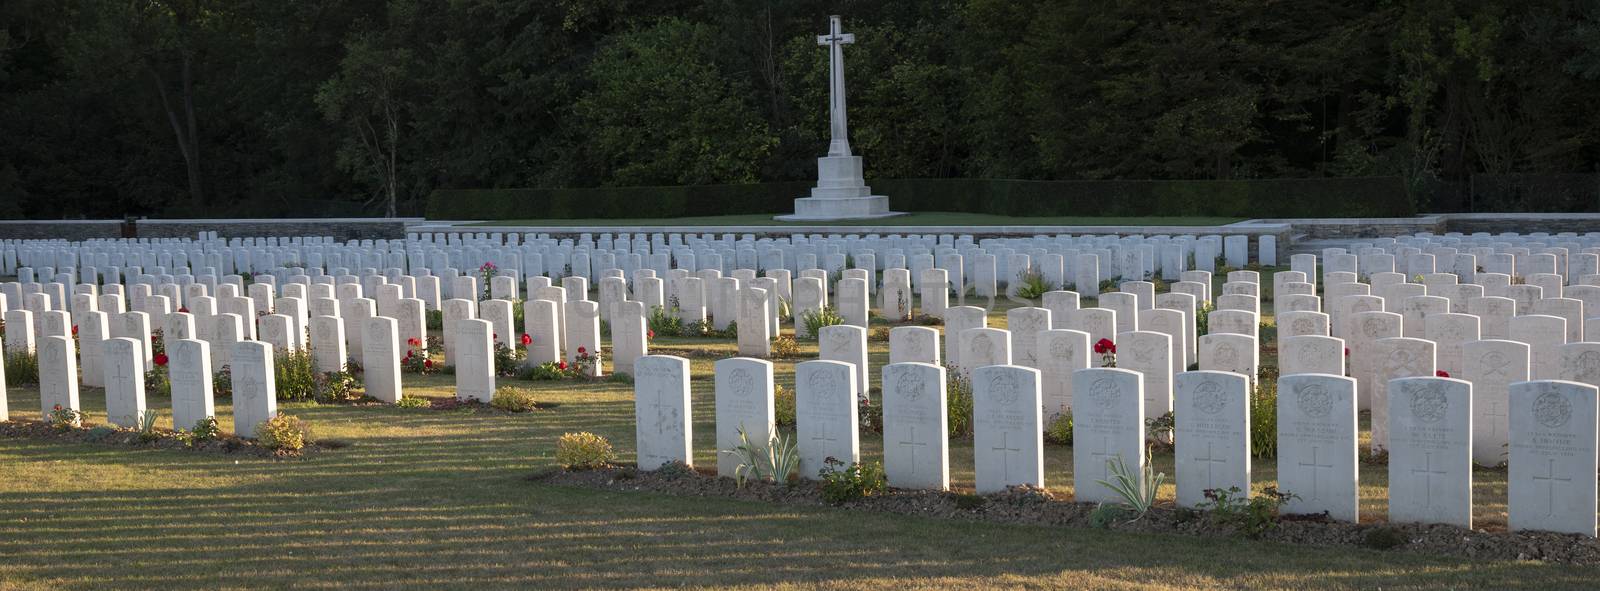 rows of grave stones on Connaught Cemetery near Albert in France by ahavelaar